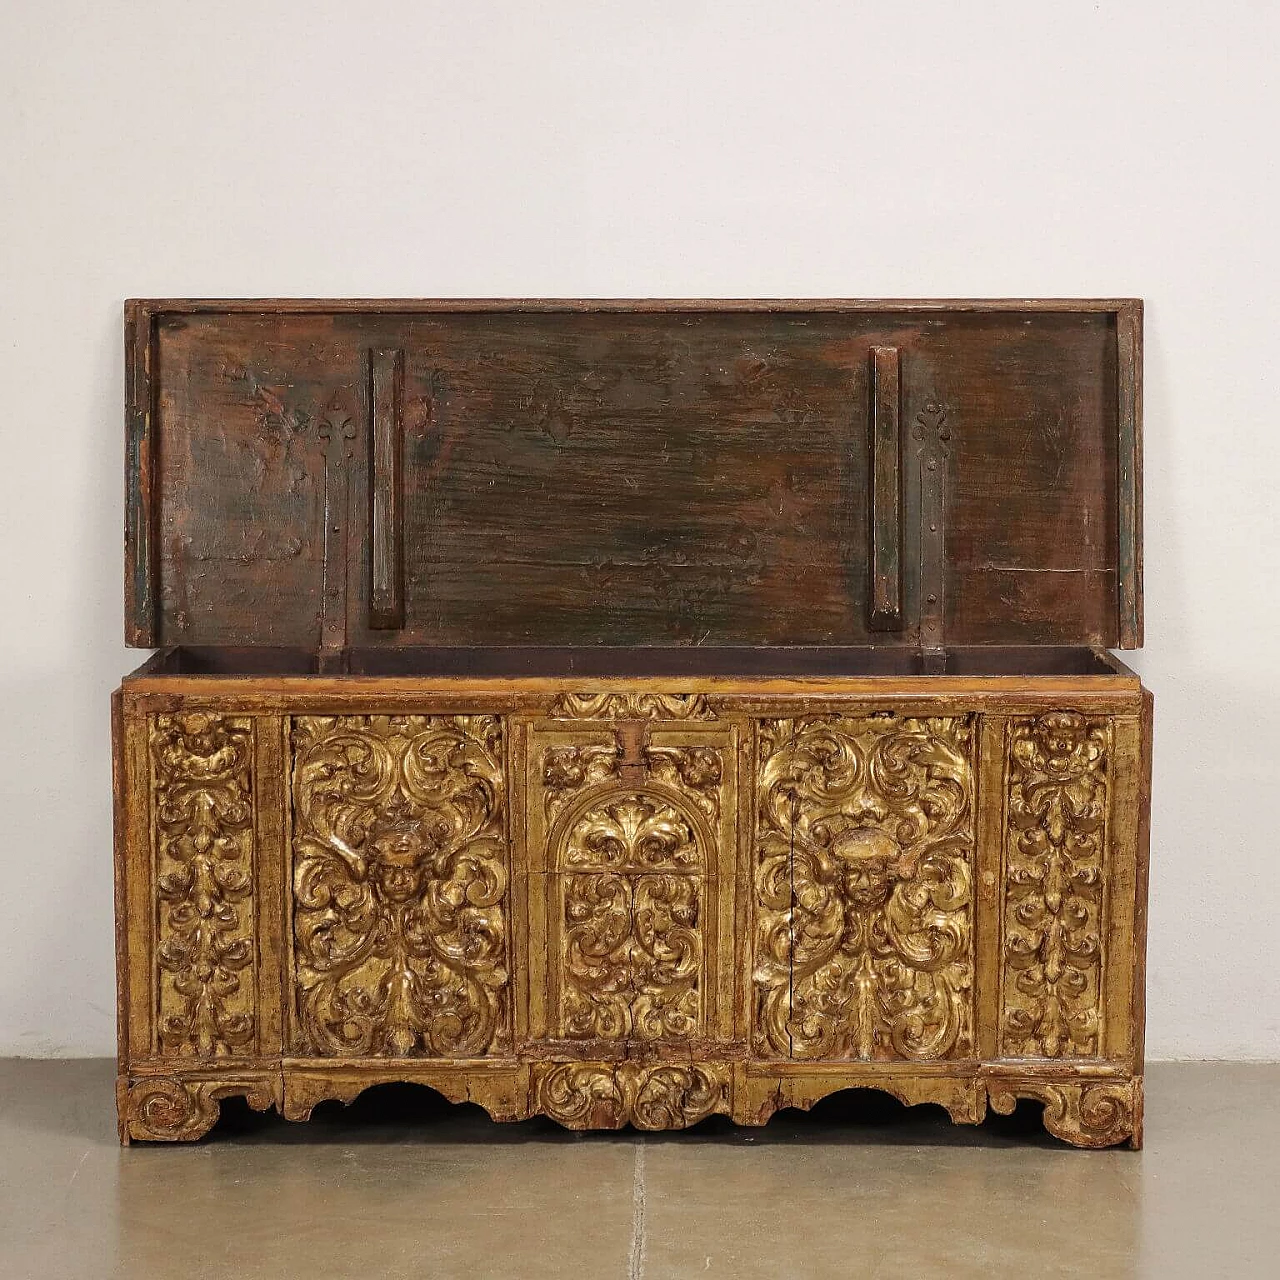 Carved and gilded wooden chest, 17th century 3